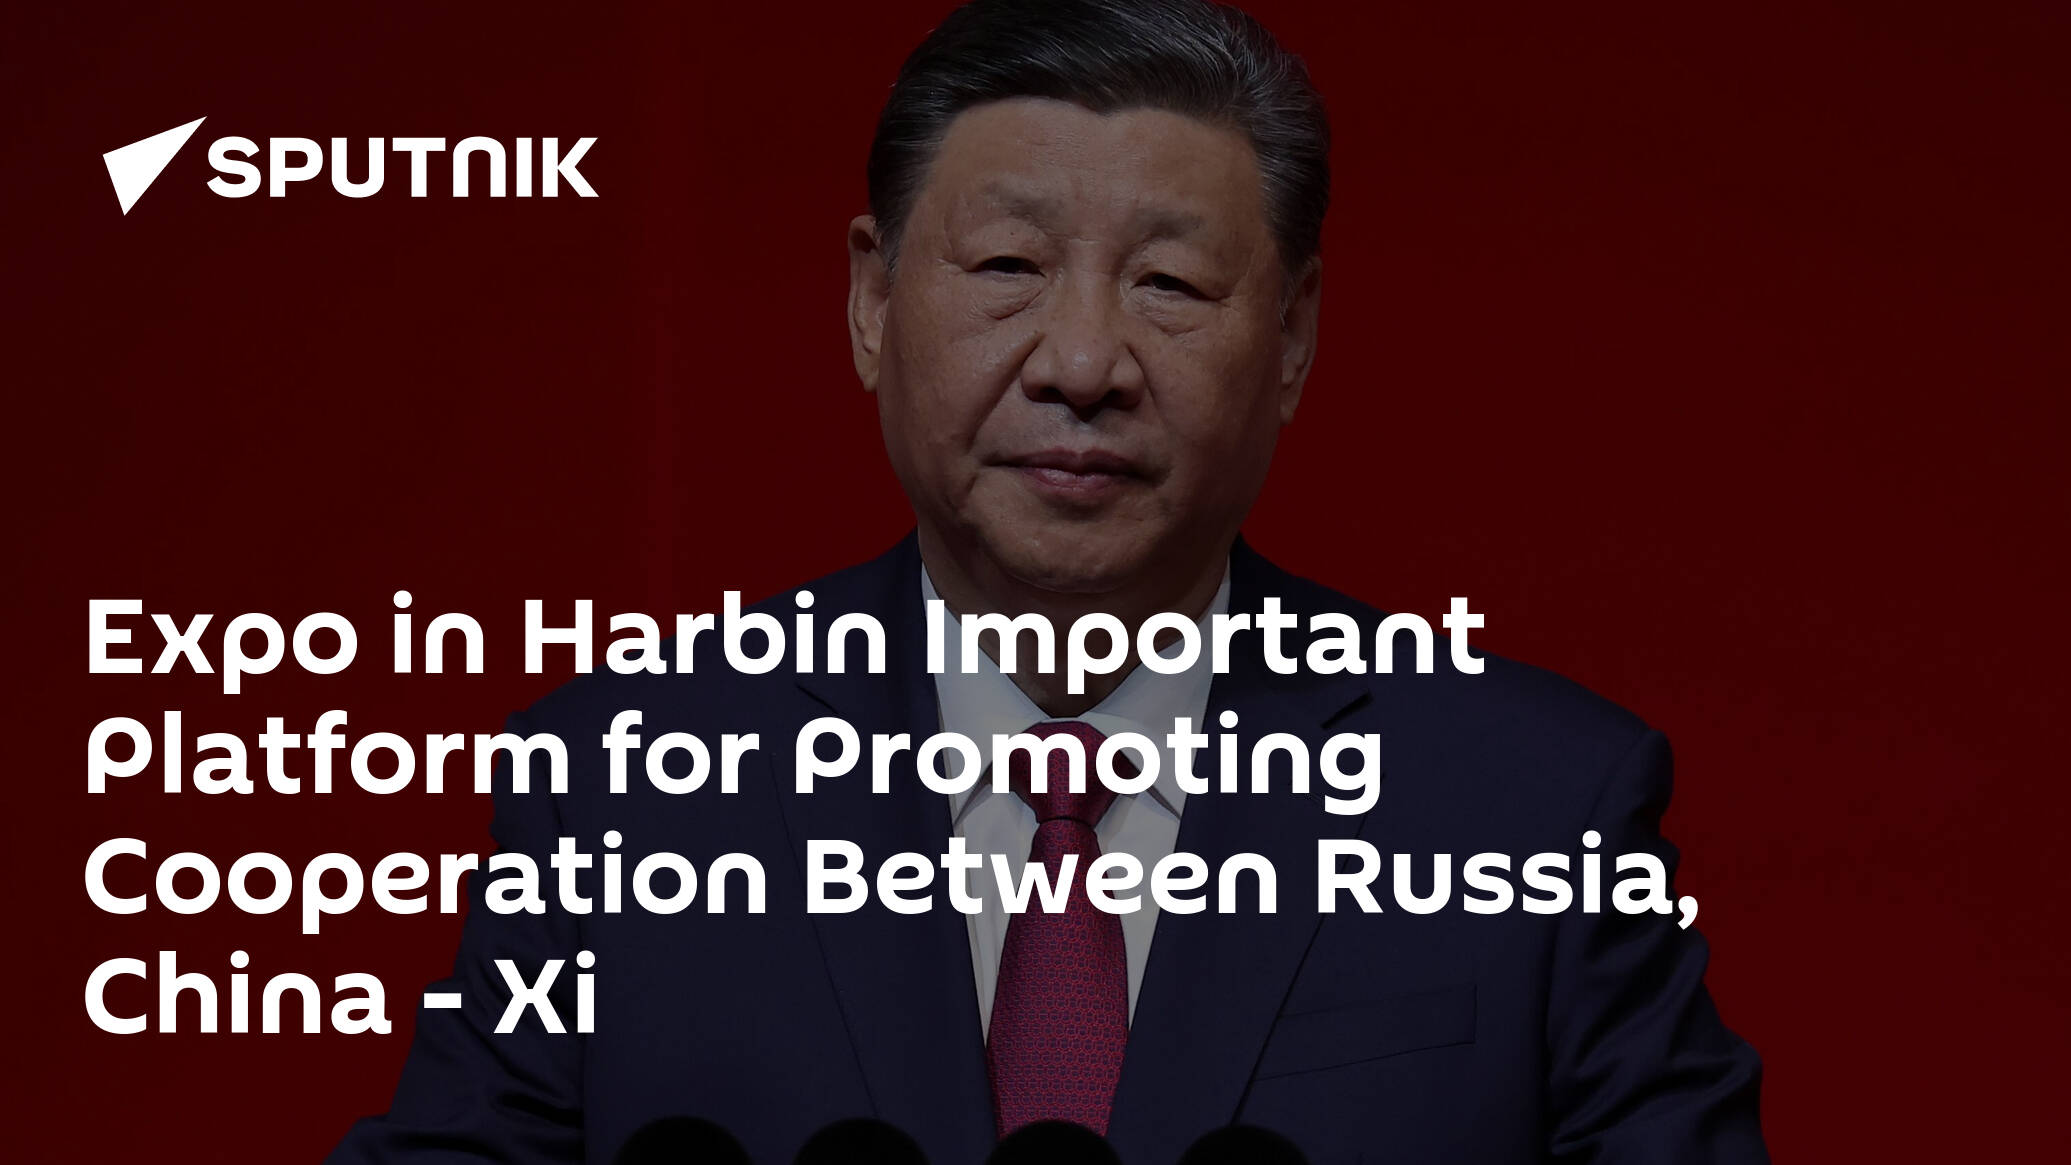 Expo in Harbin Important Platform for Promoting Cooperation Between Russia, China – Xi